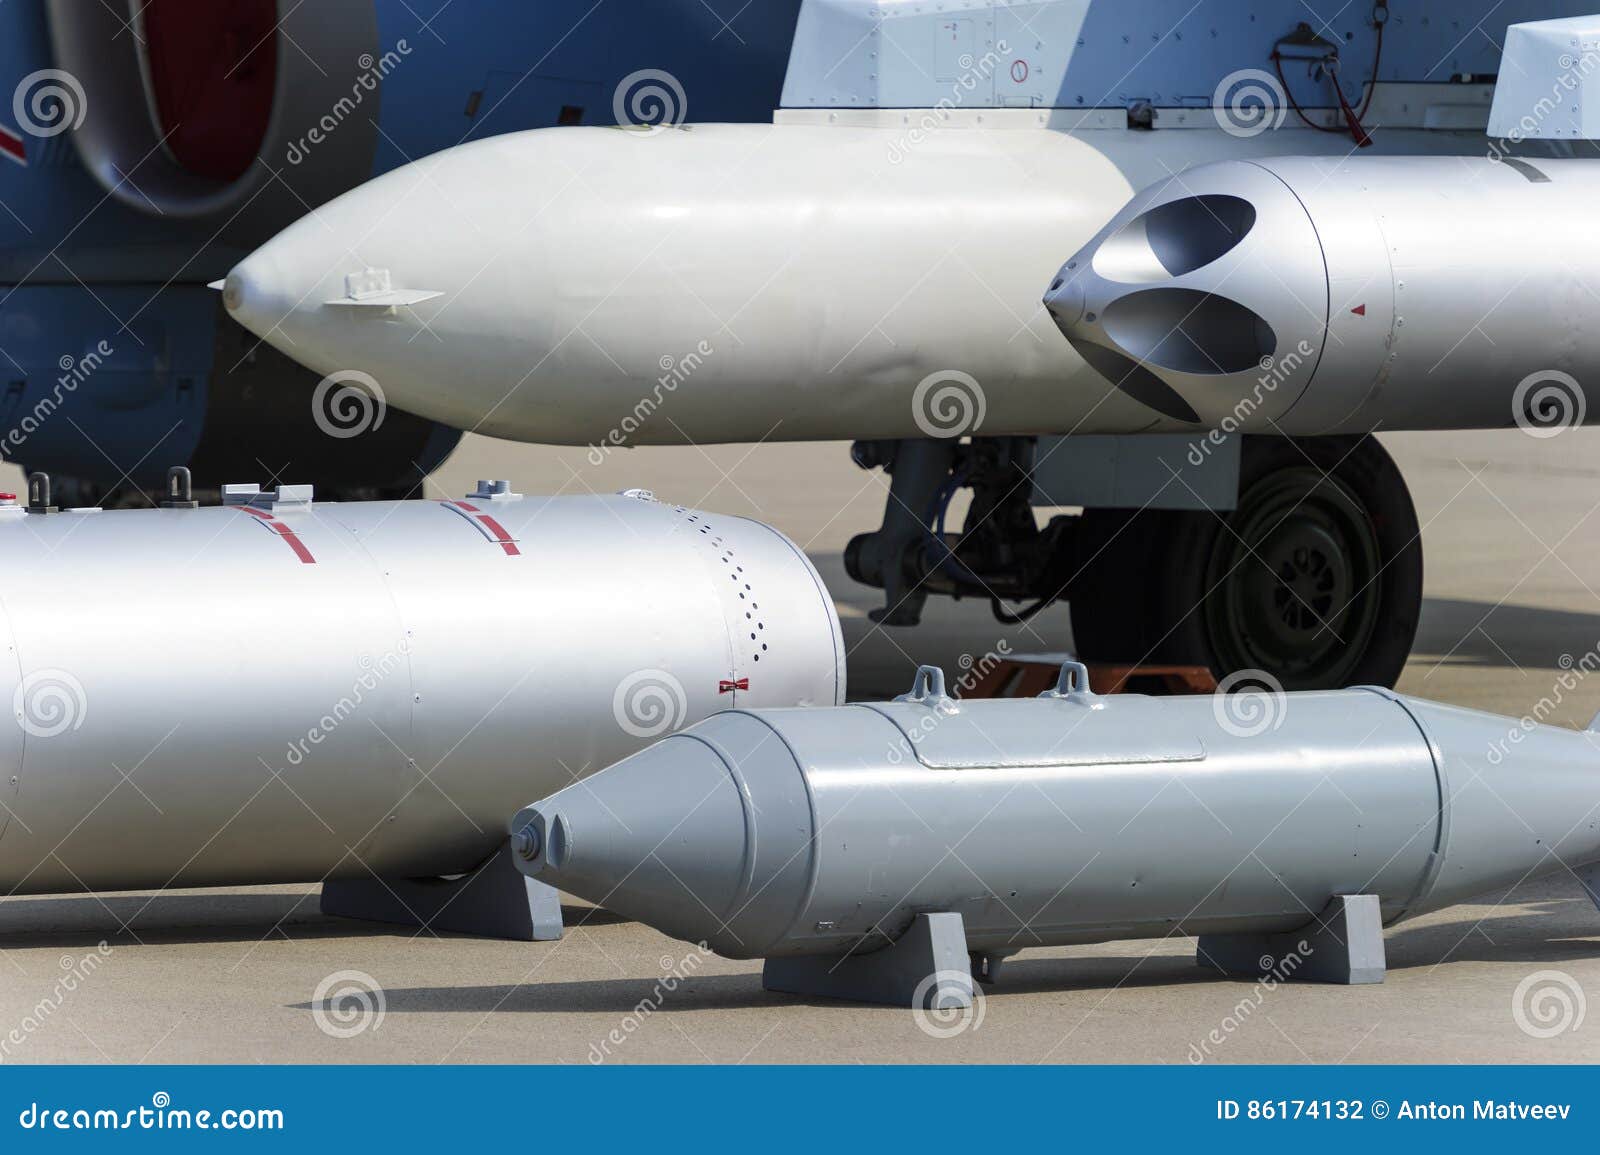 fighter missiles and bombs